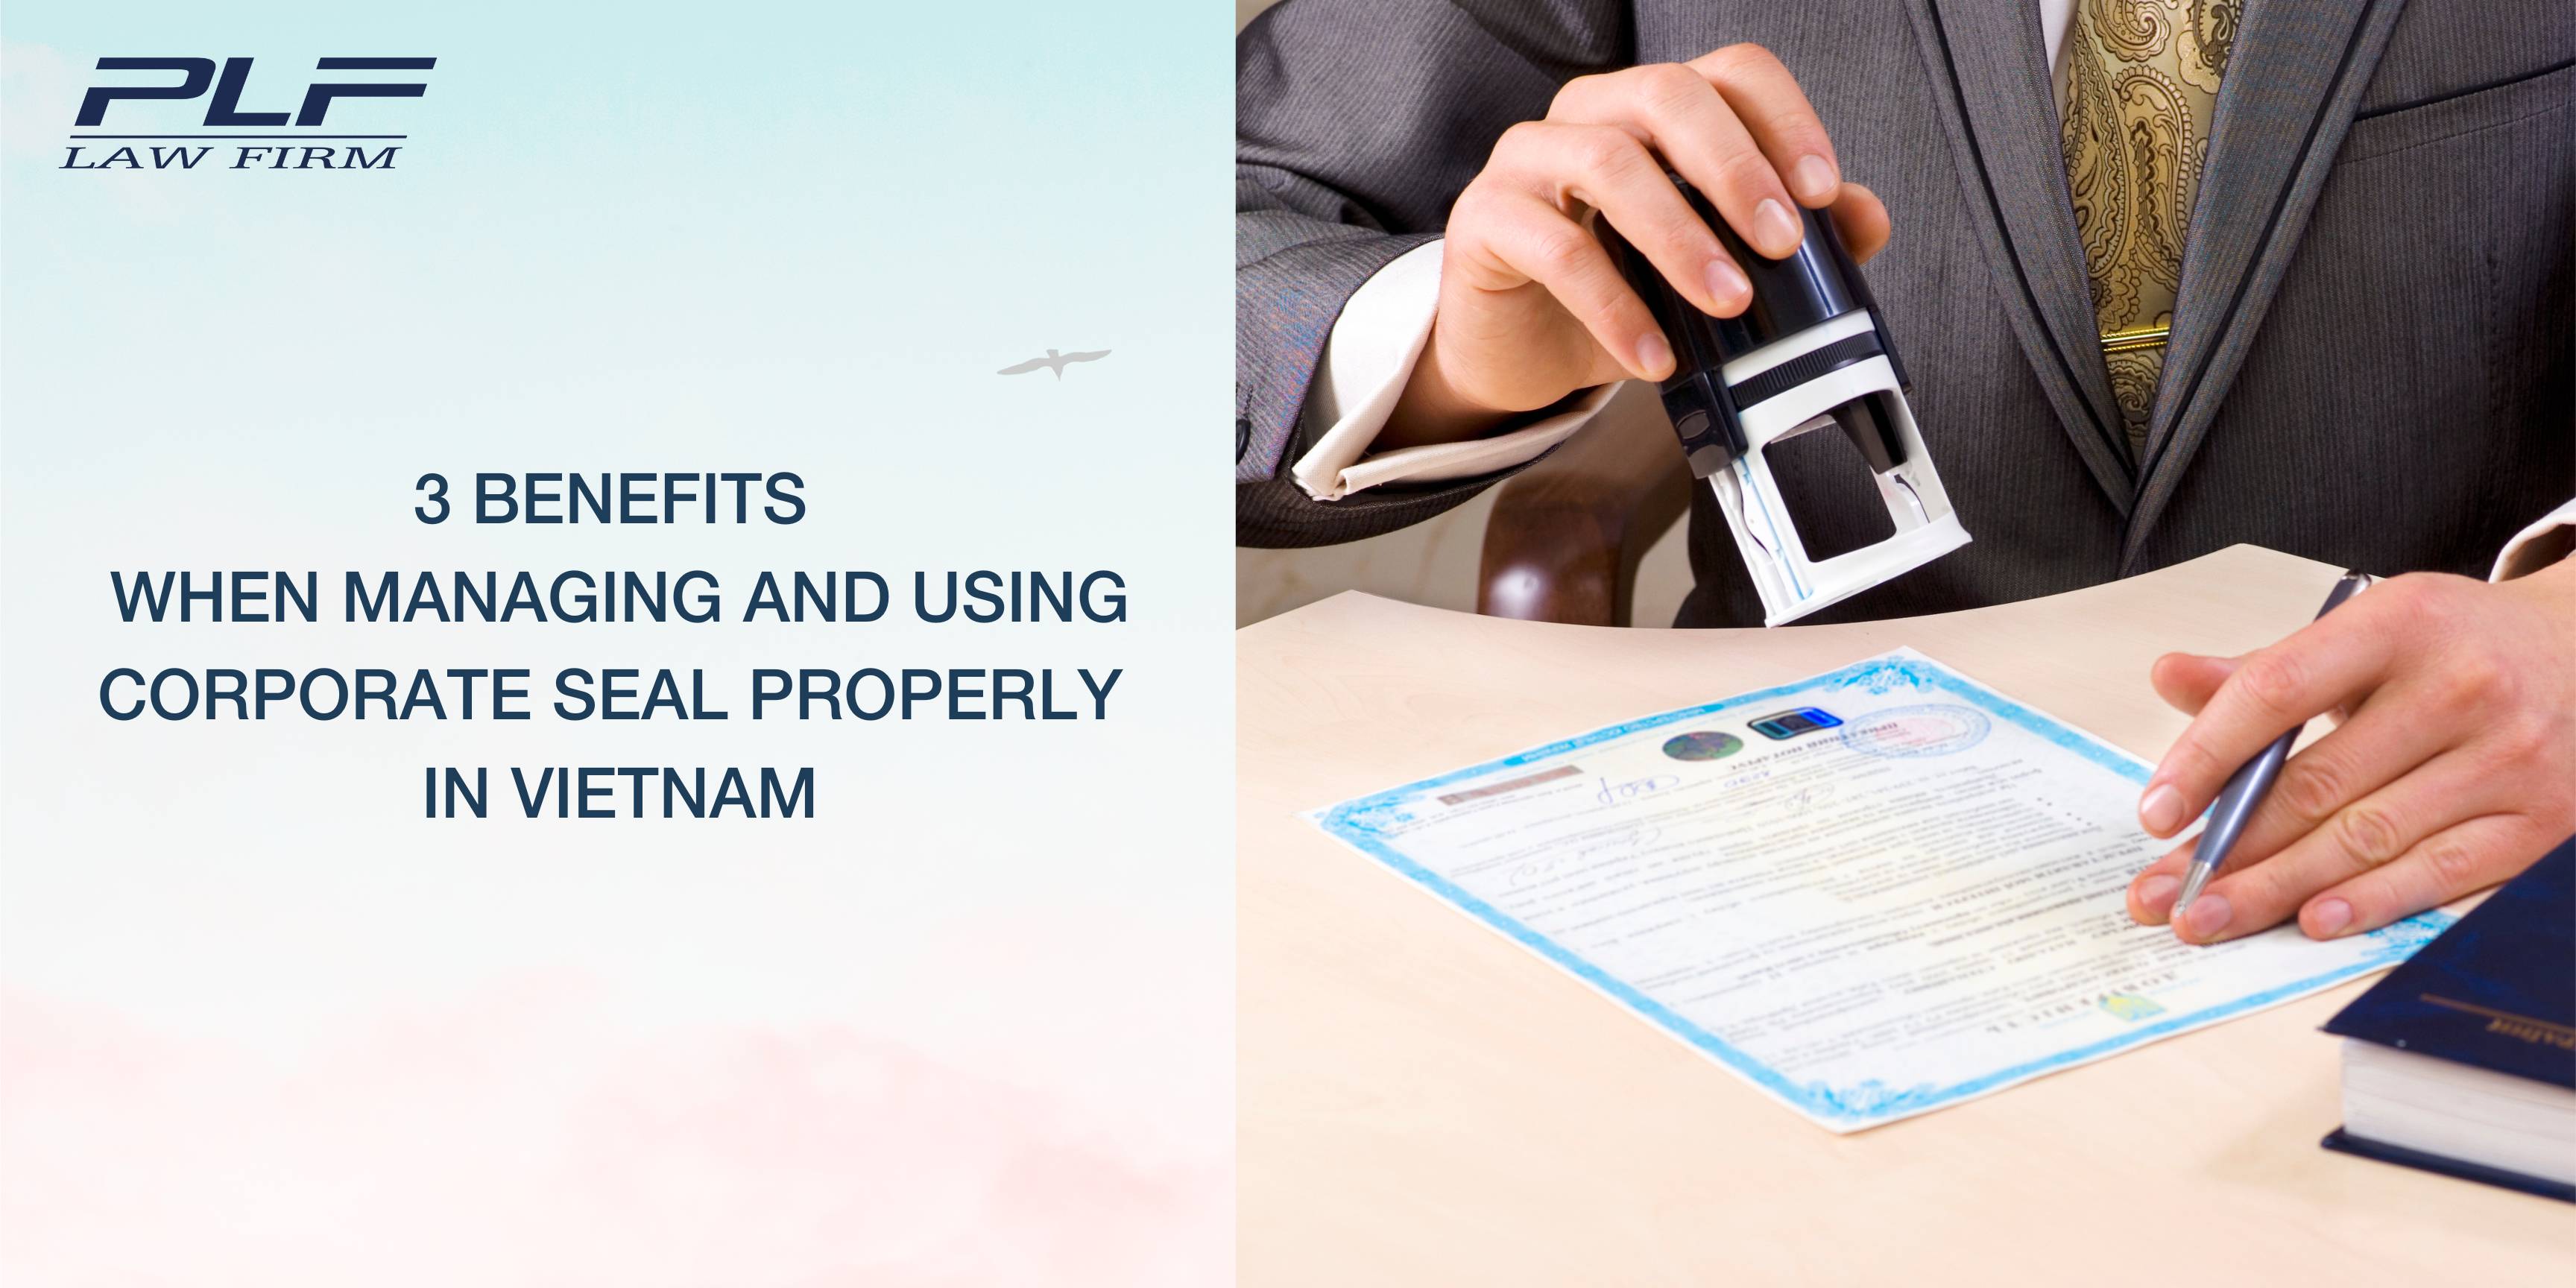 Plf 3 Benefits When Managing And Using Corporate Seal Properly In Vietnam